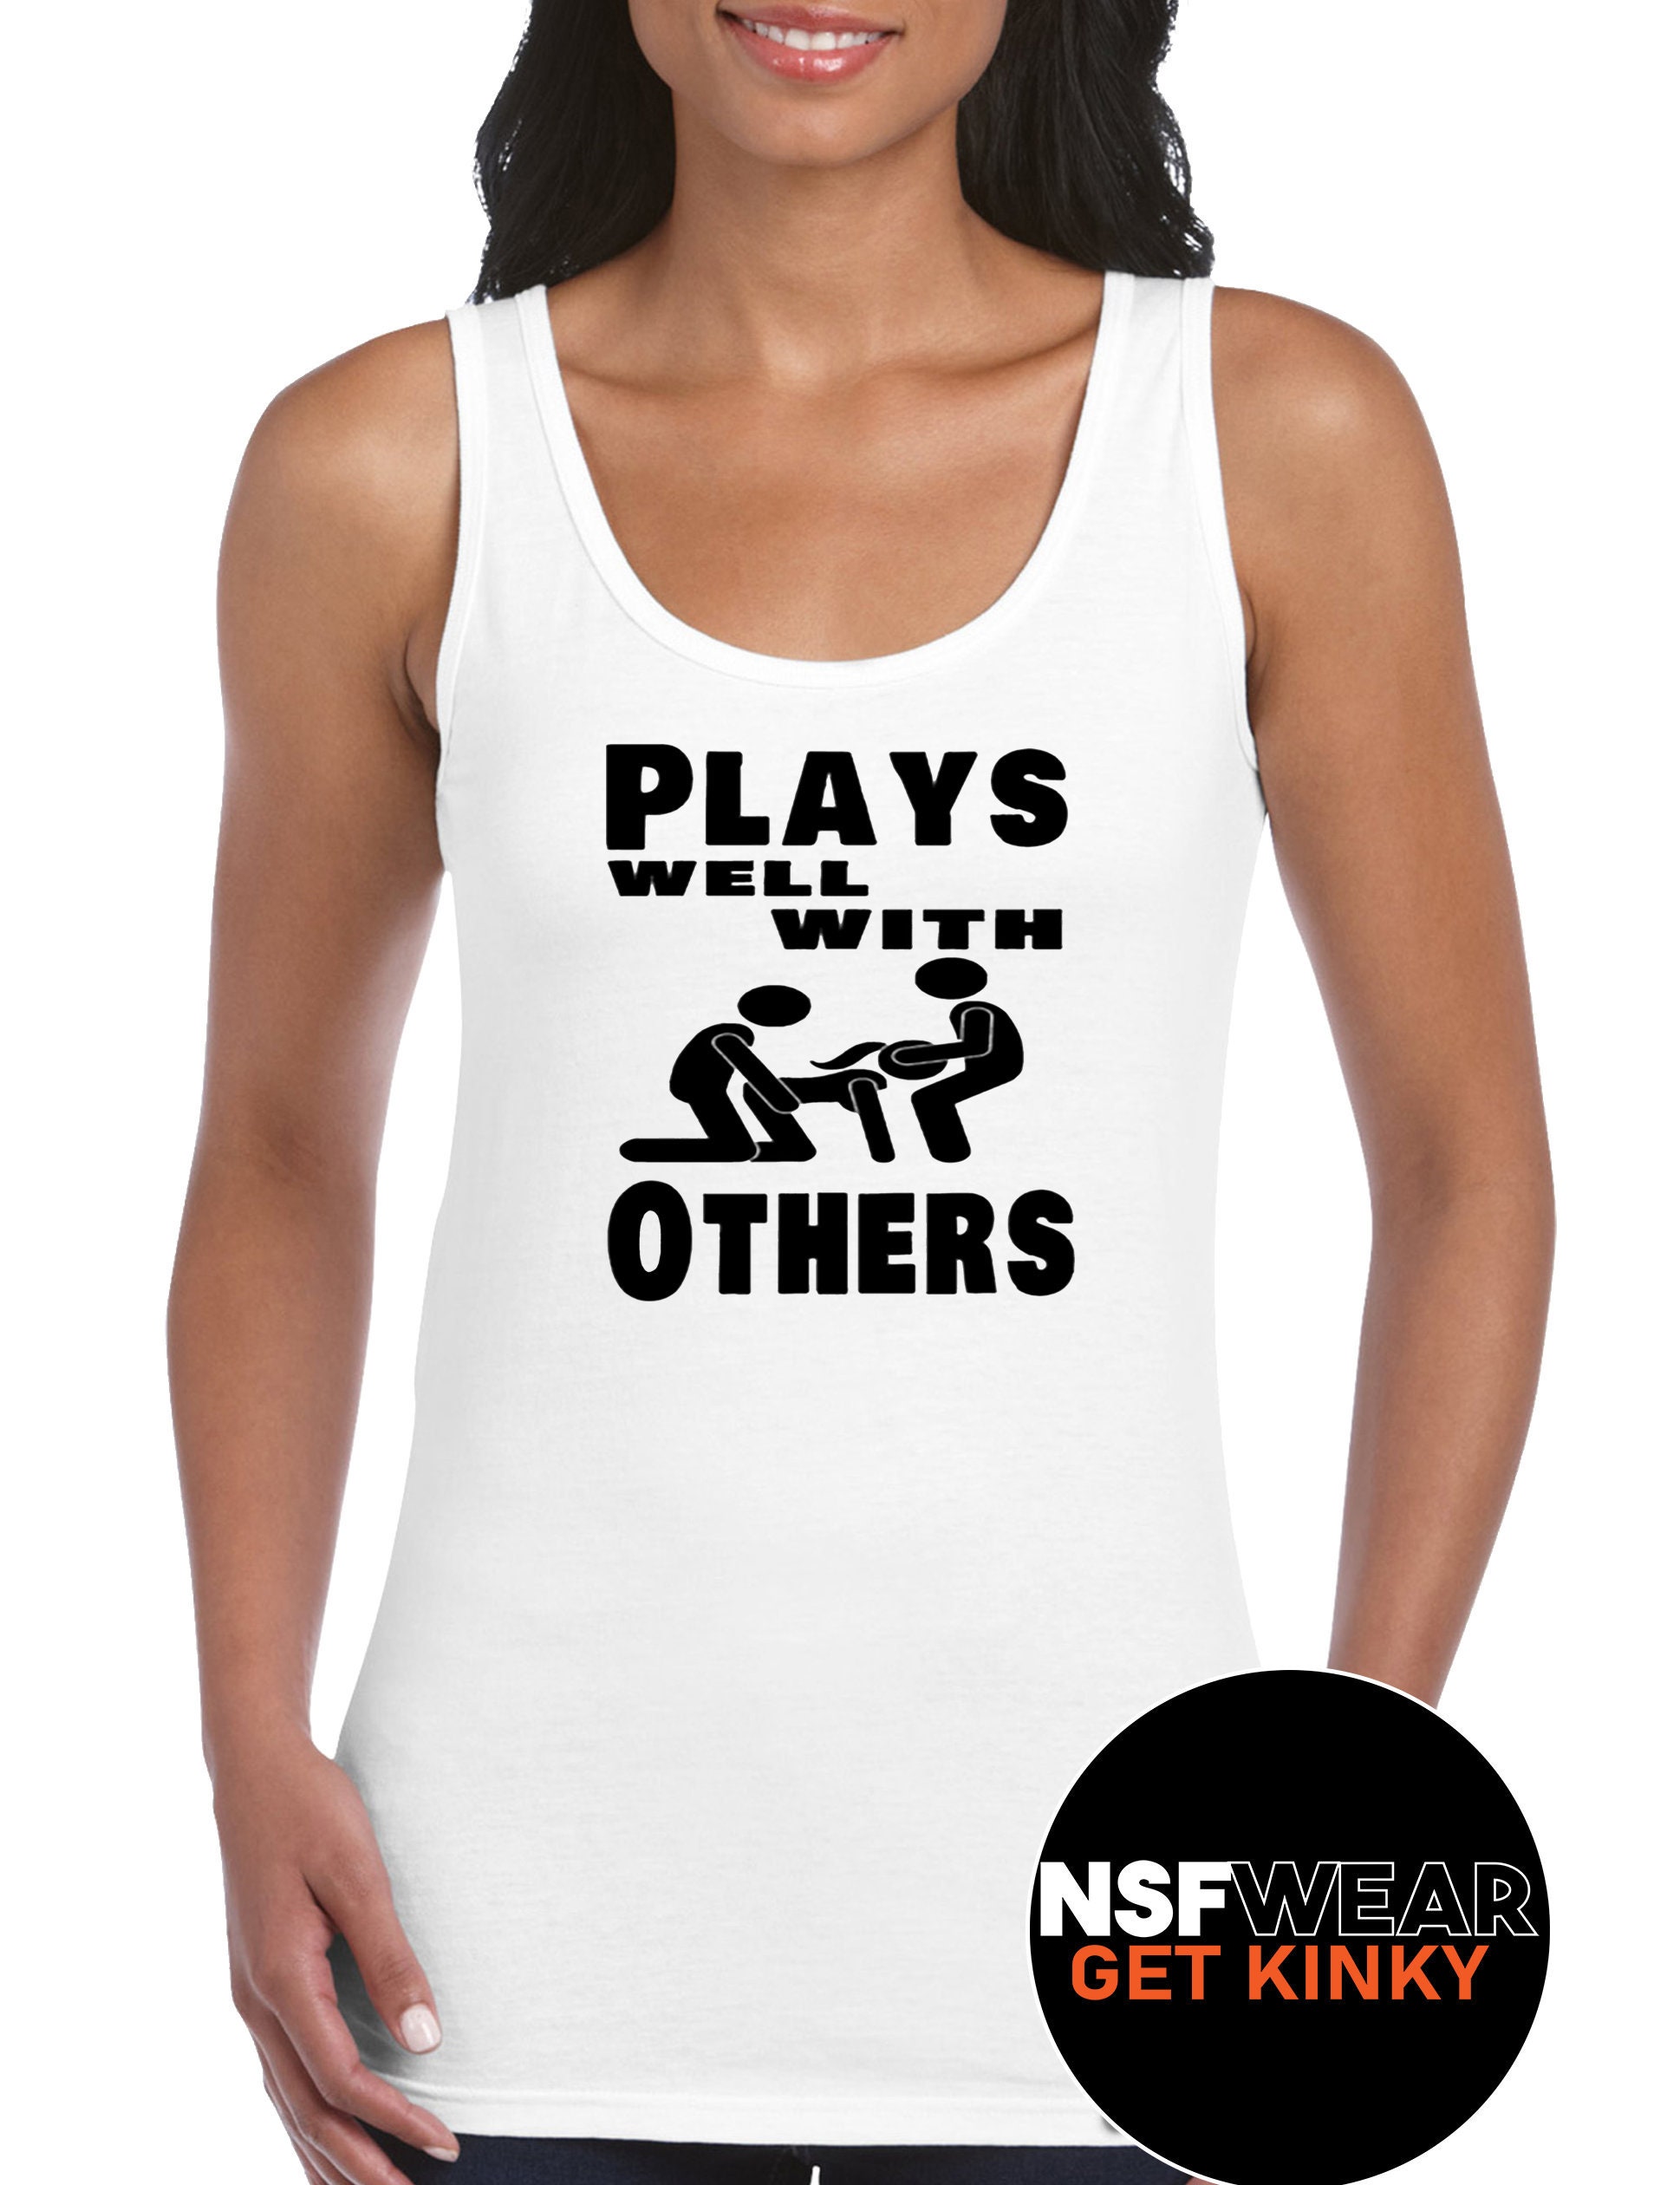 Plays Well With Others Tank T-shirt Cami or Apron Hotwife photo pic